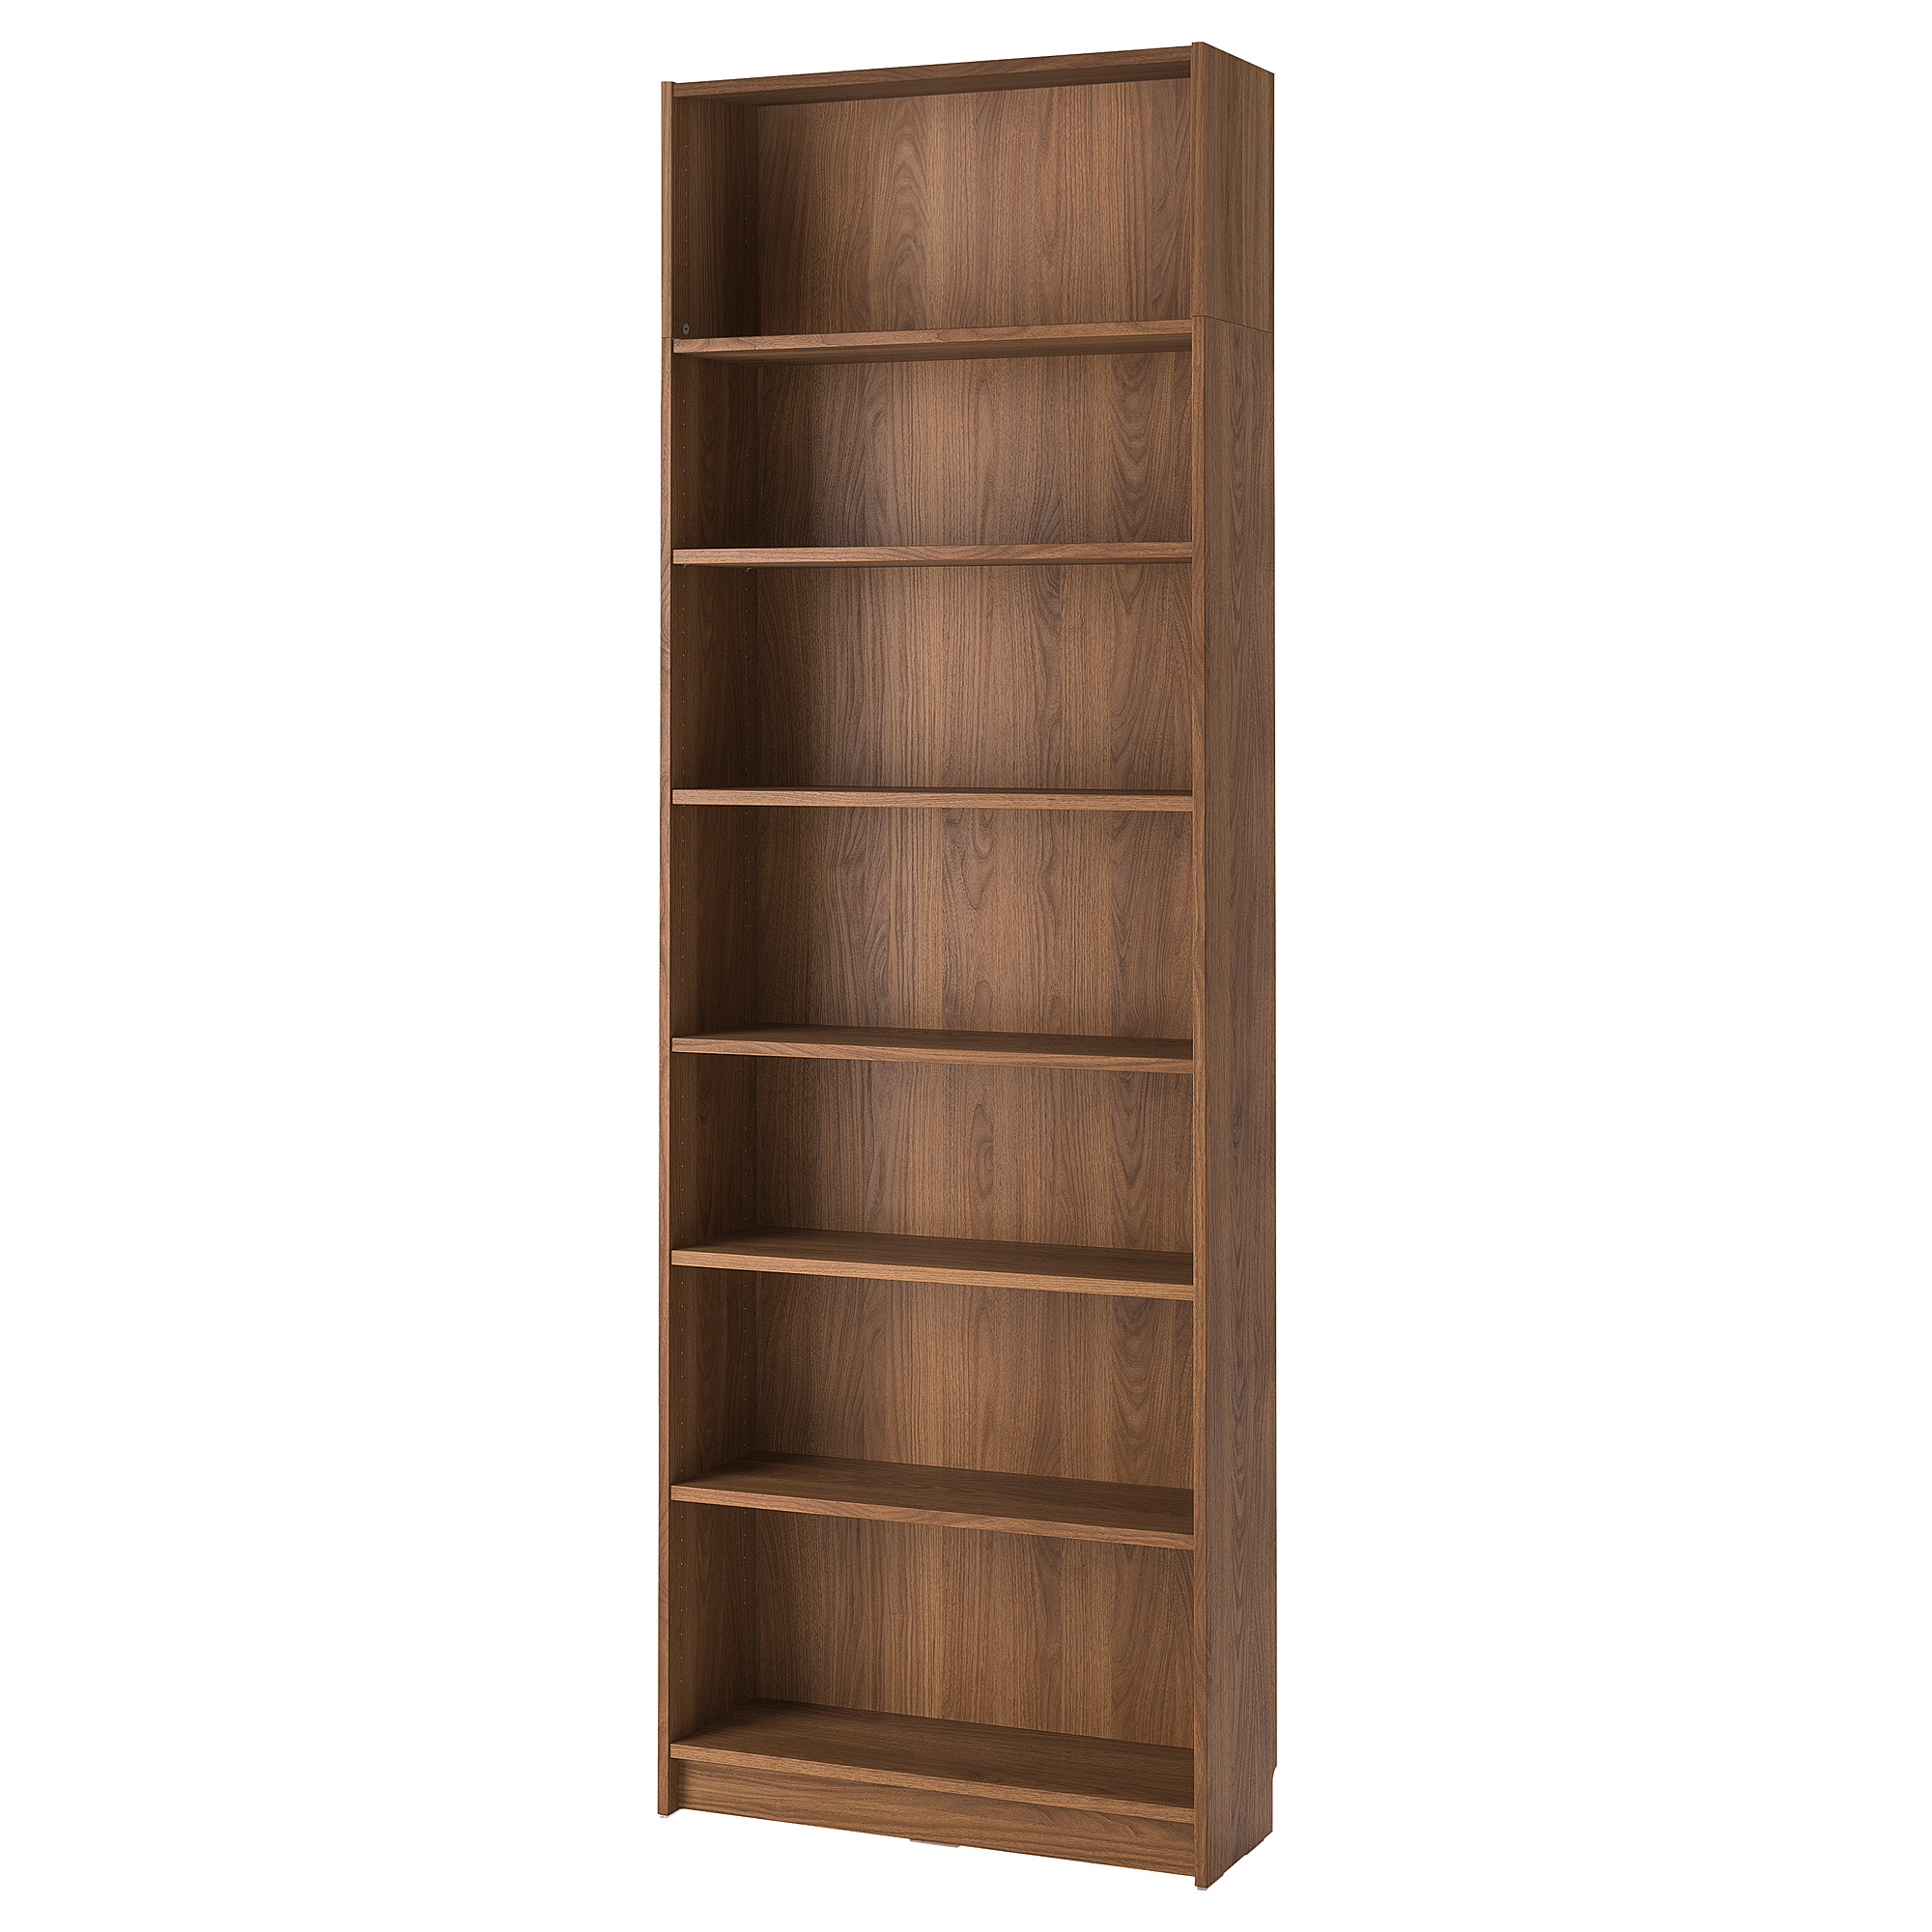 BILLY bookcase with height extension unit